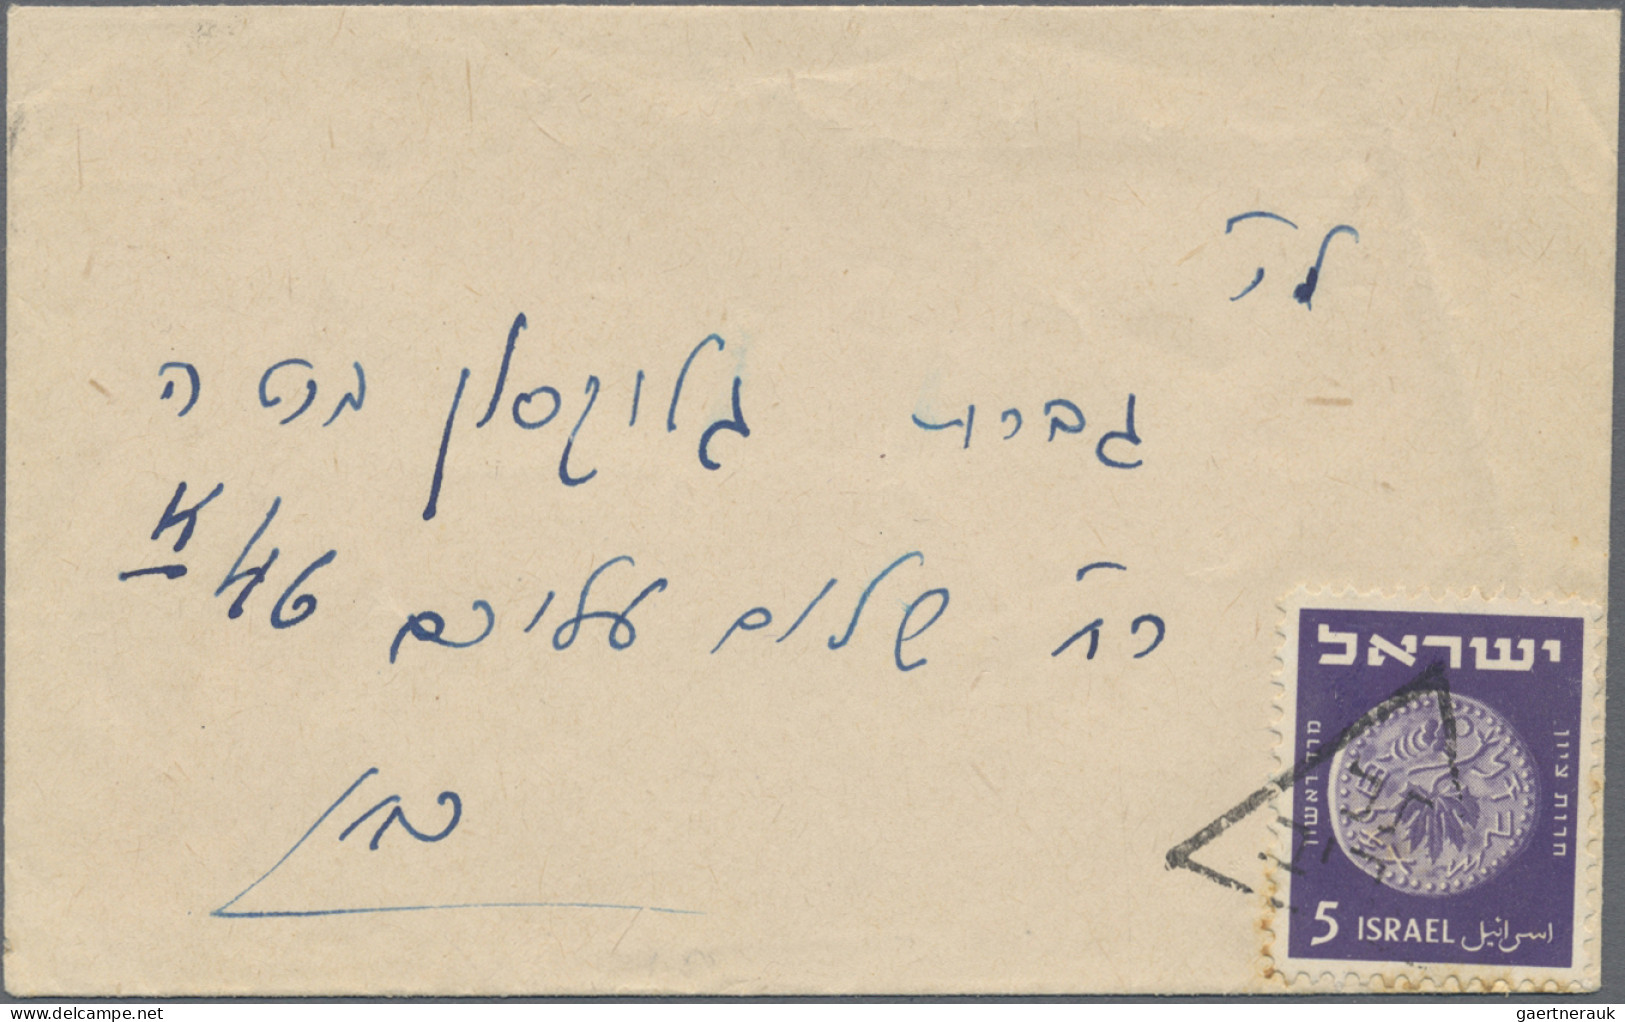 Israel: 1960/2000, accumulation of more than 800 covers/cards/stationeries, main